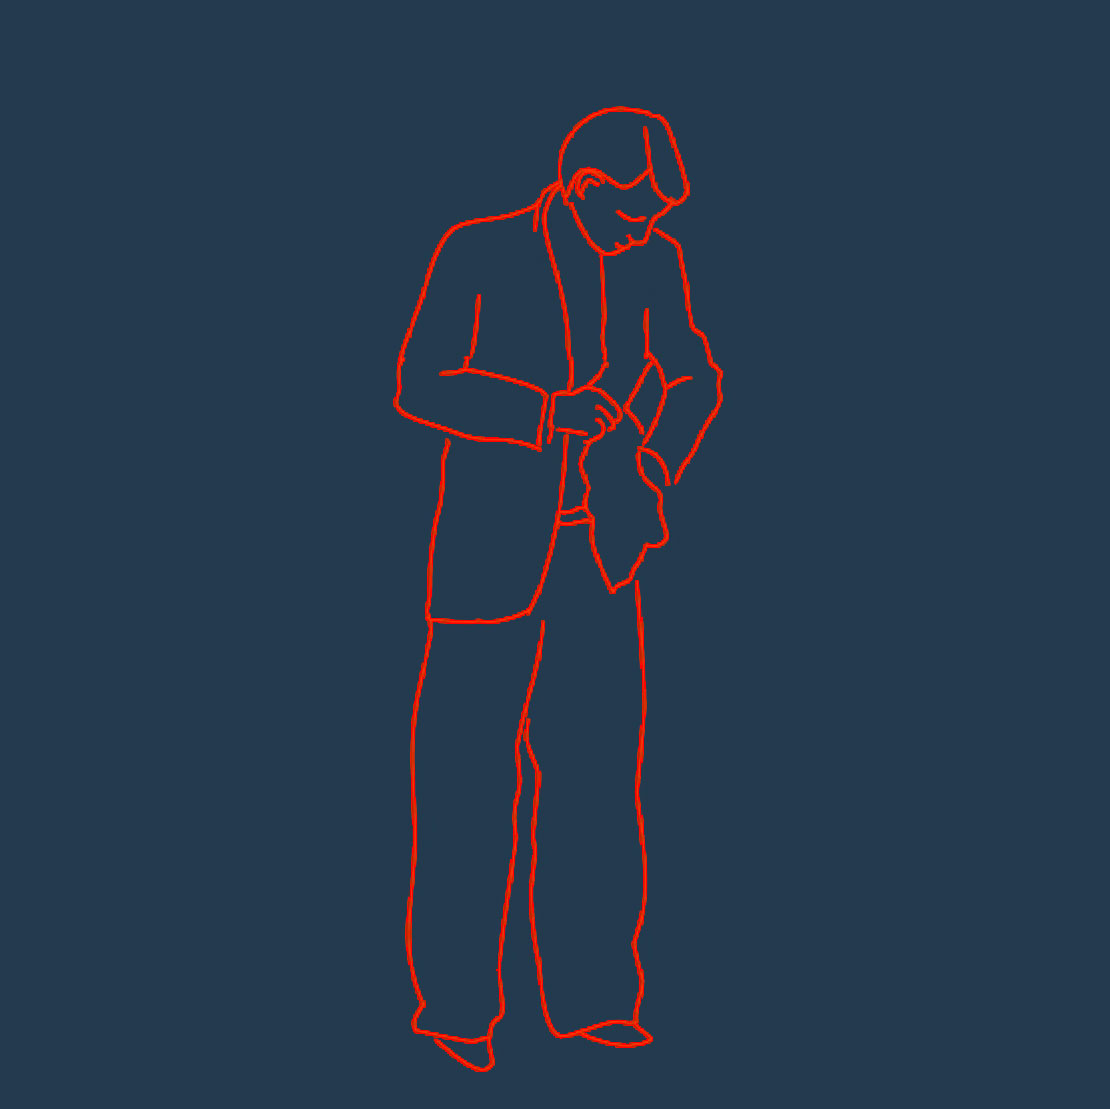 Frame from a Flash animation by Julia Stoops, depicting a line-drawn androgynous figure emptying the pockets of their jacket.